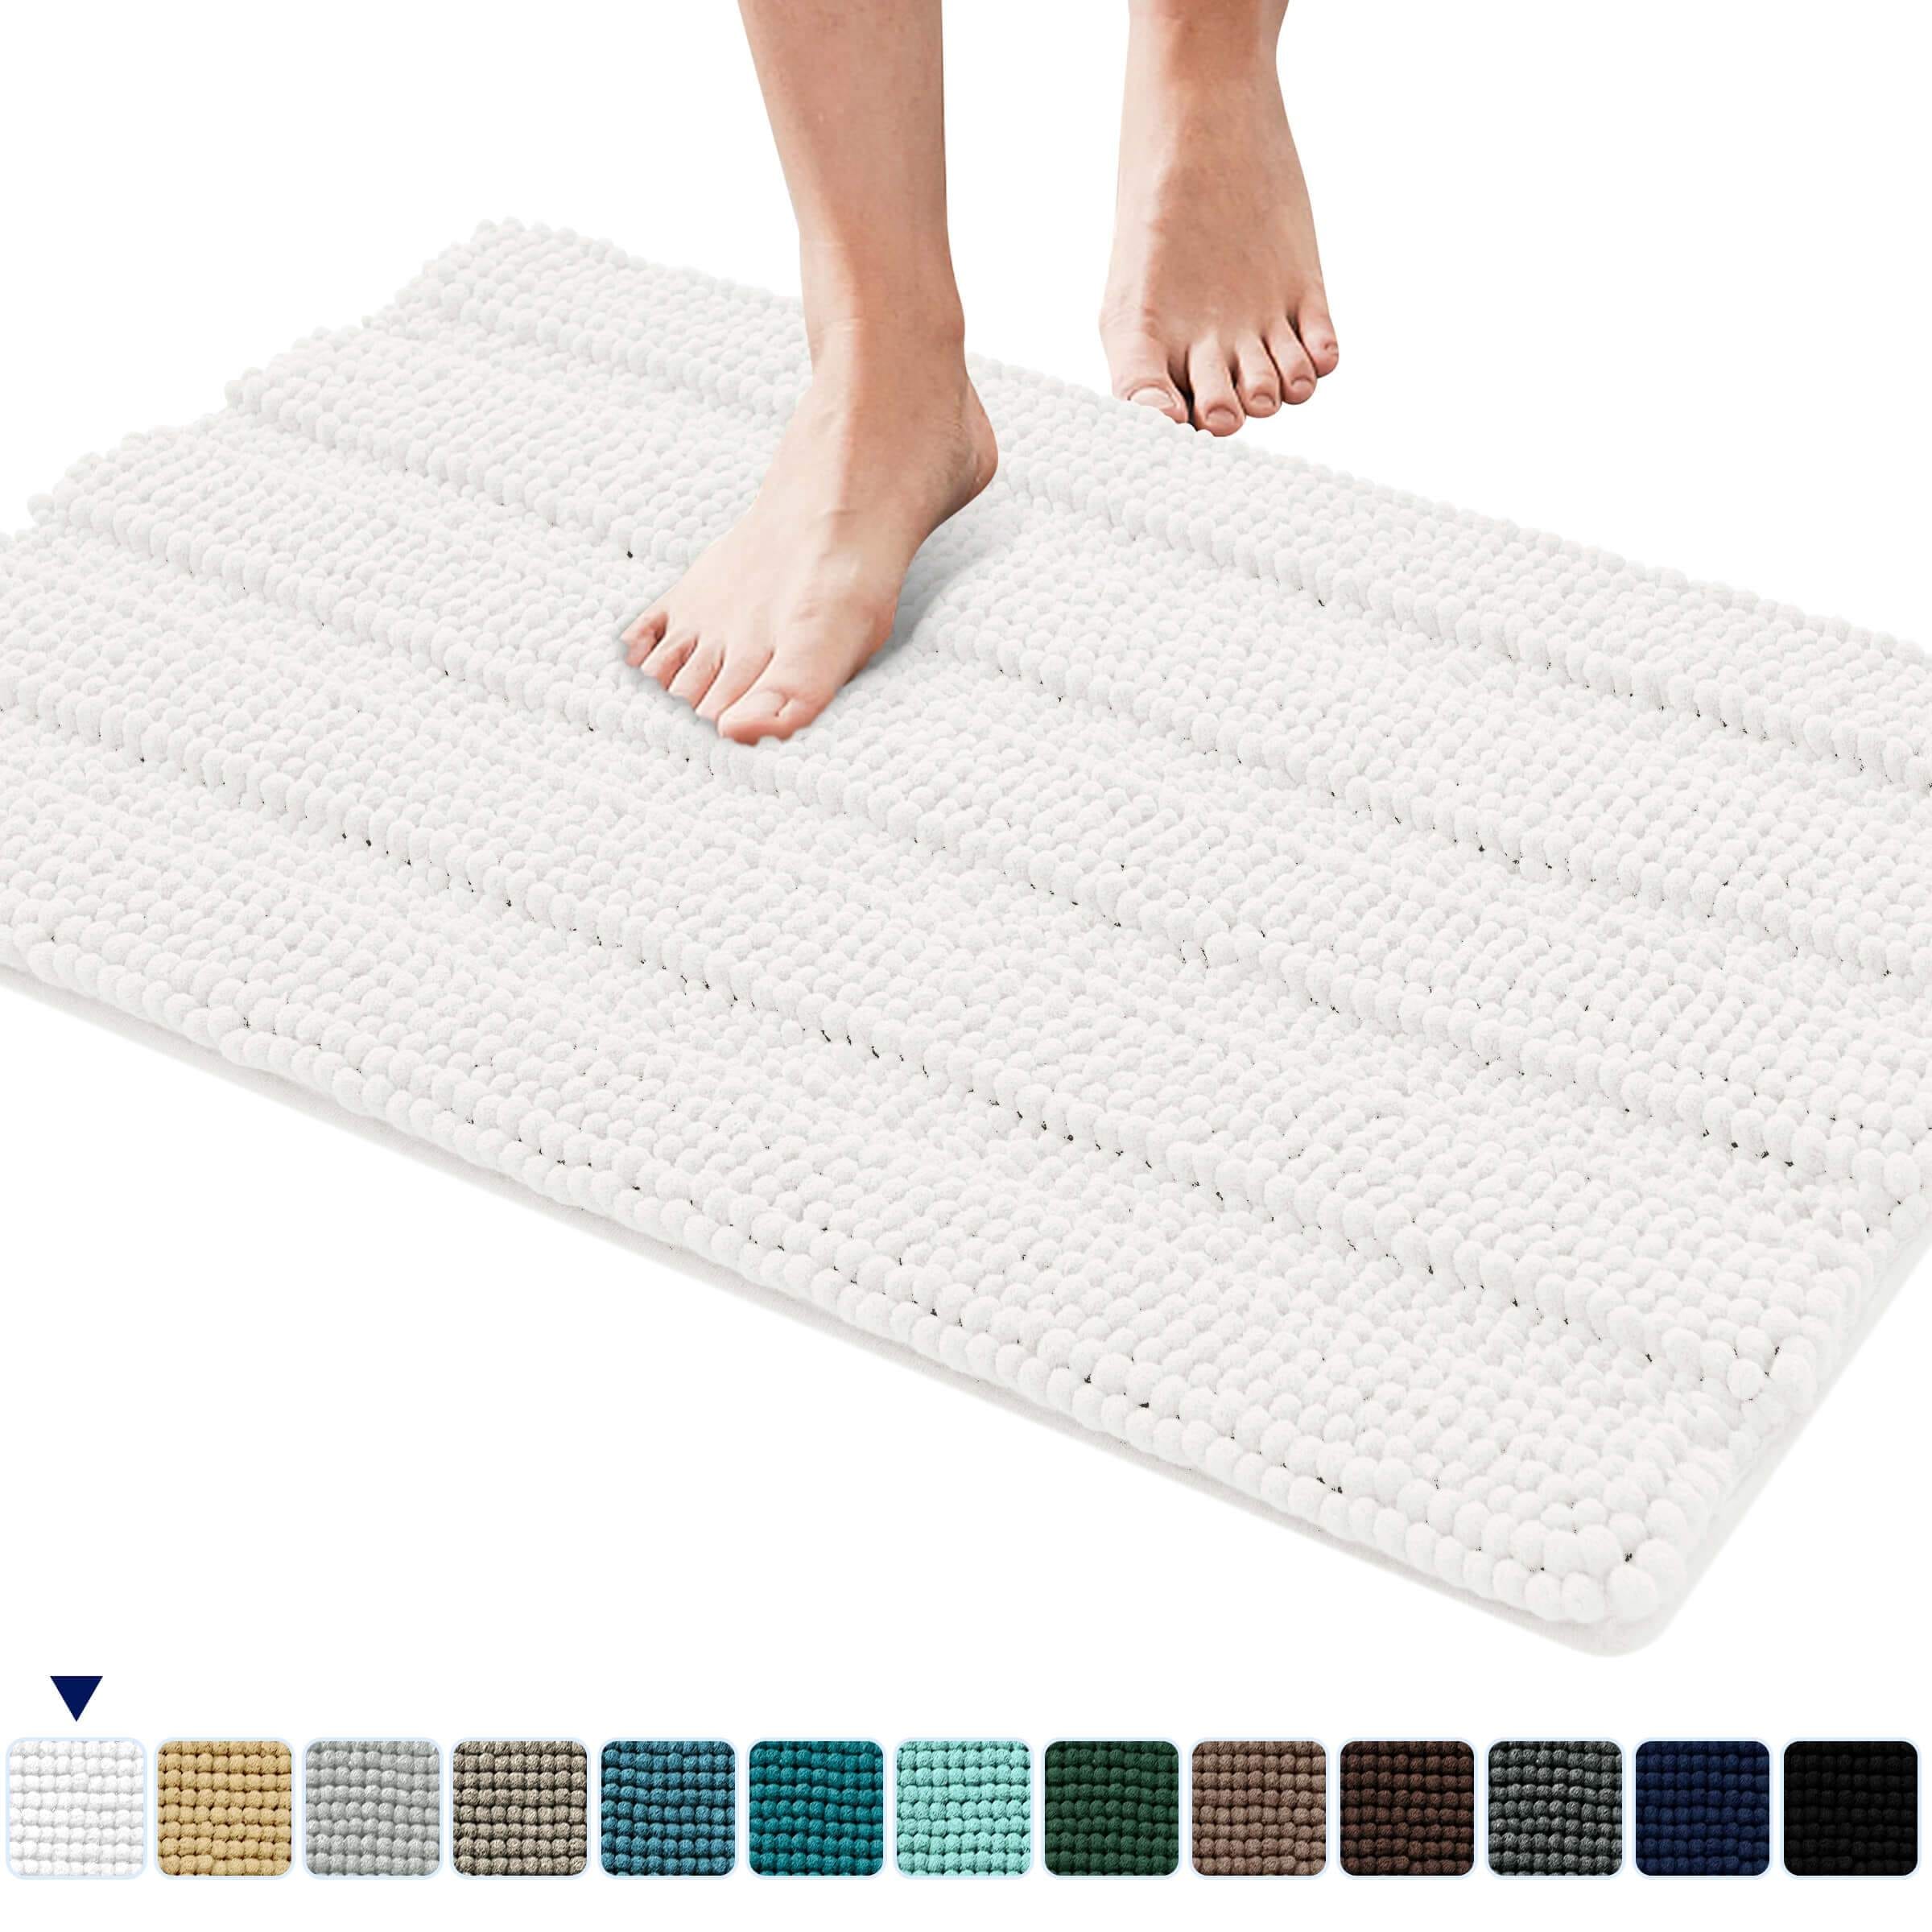 https://ak1.ostkcdn.com/images/products/is/images/direct/da6726bec642d9170ec700d7eae3b484d679138b/Subrtex-Supersoft-and-Absorbent-Braided-Bathroom-Rugs-Chenille-Bath-Rugs.jpg